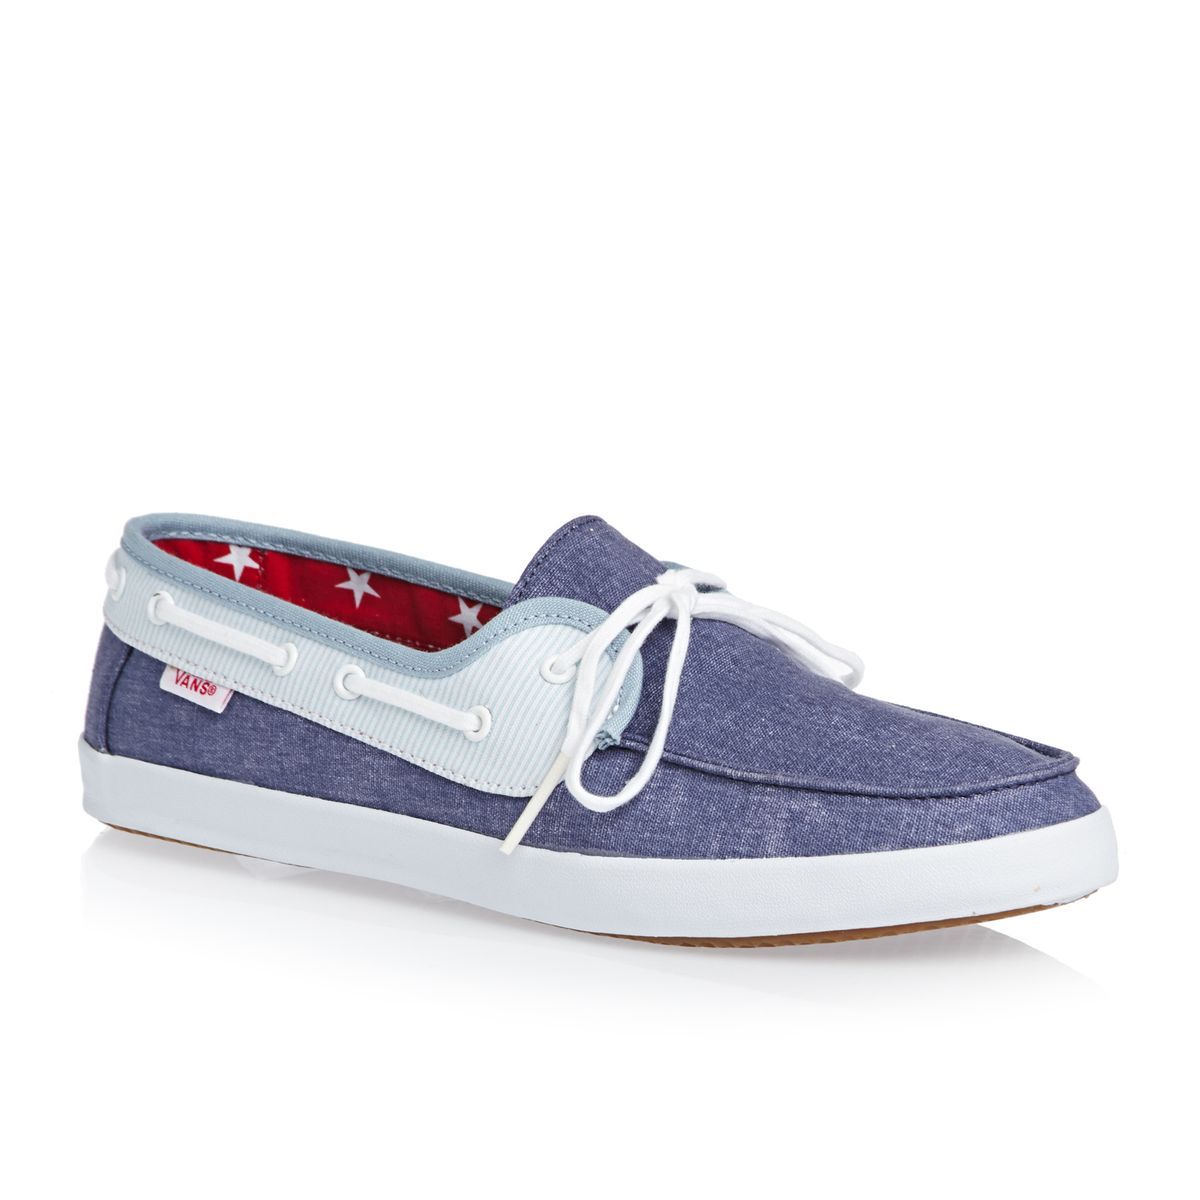 Vans Chauffette Americana in Navy with Stars